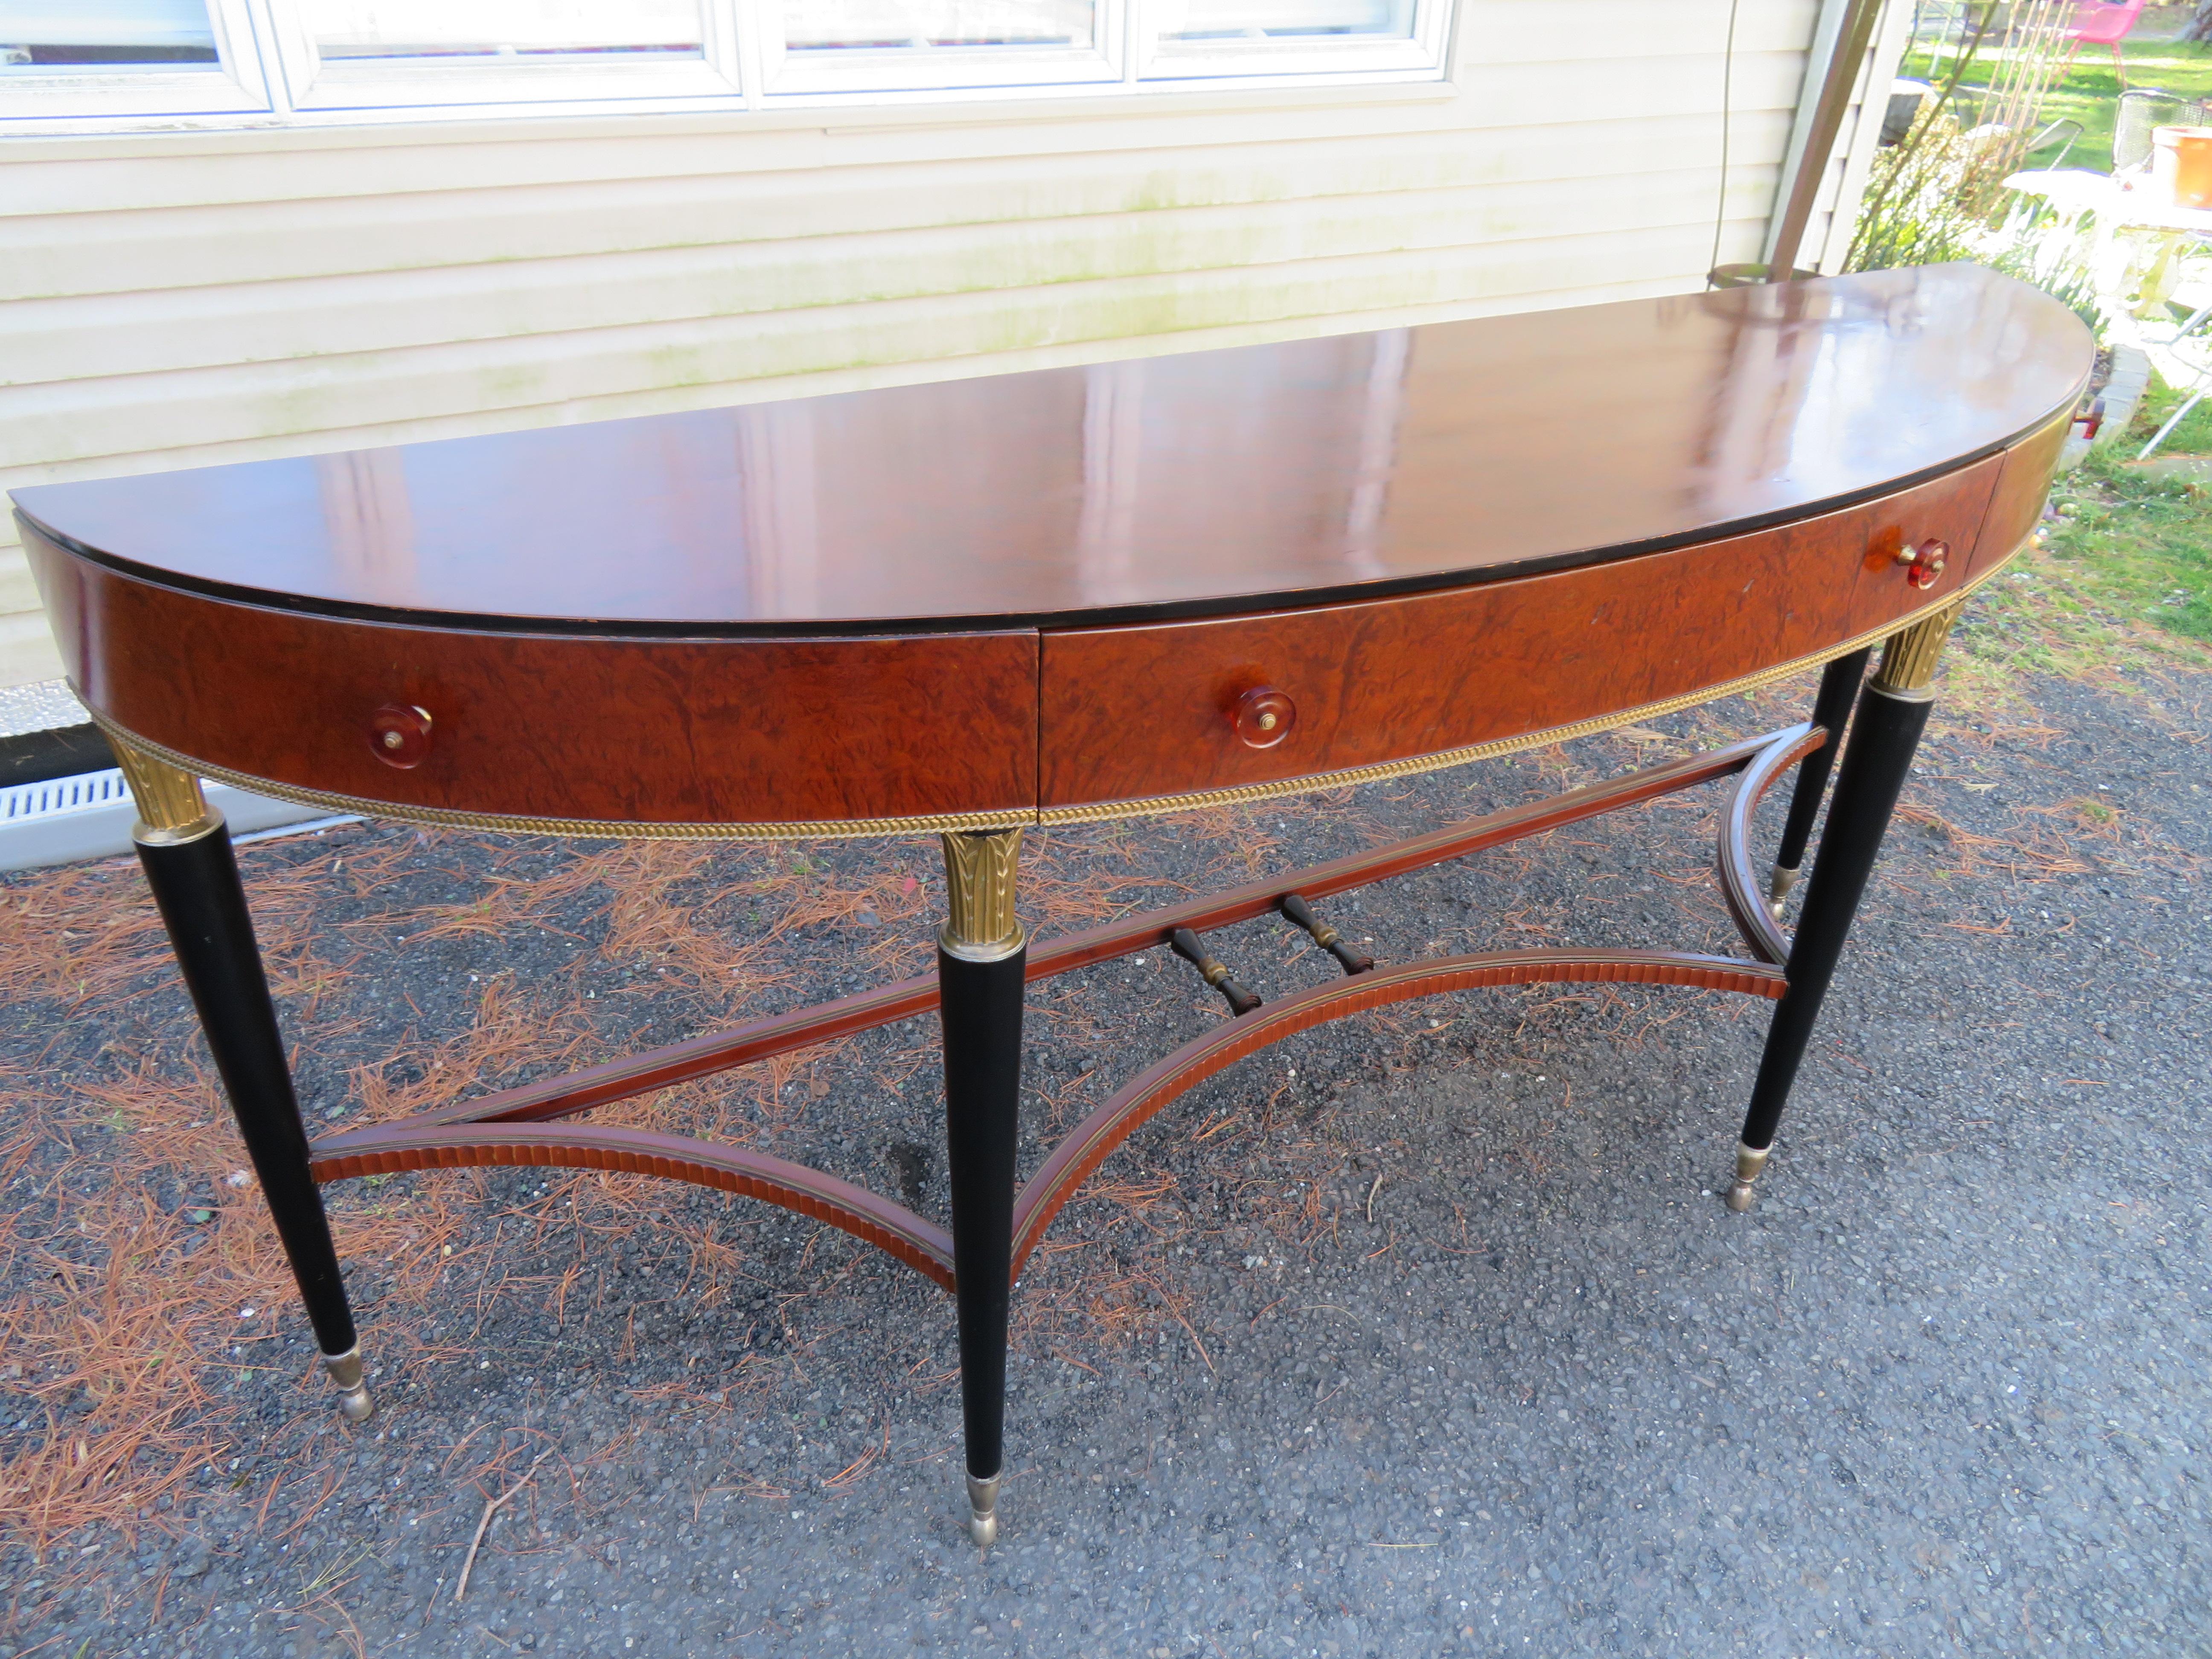 Exquisite French Louis XVI-style flamed mahogany demi-lune console table. One dovetailed drawer with lovely bakelite and brass pulls. The elegant tapered ebonized legs have lovely hand-carved gilded acanthus capitals and terminate with interesting